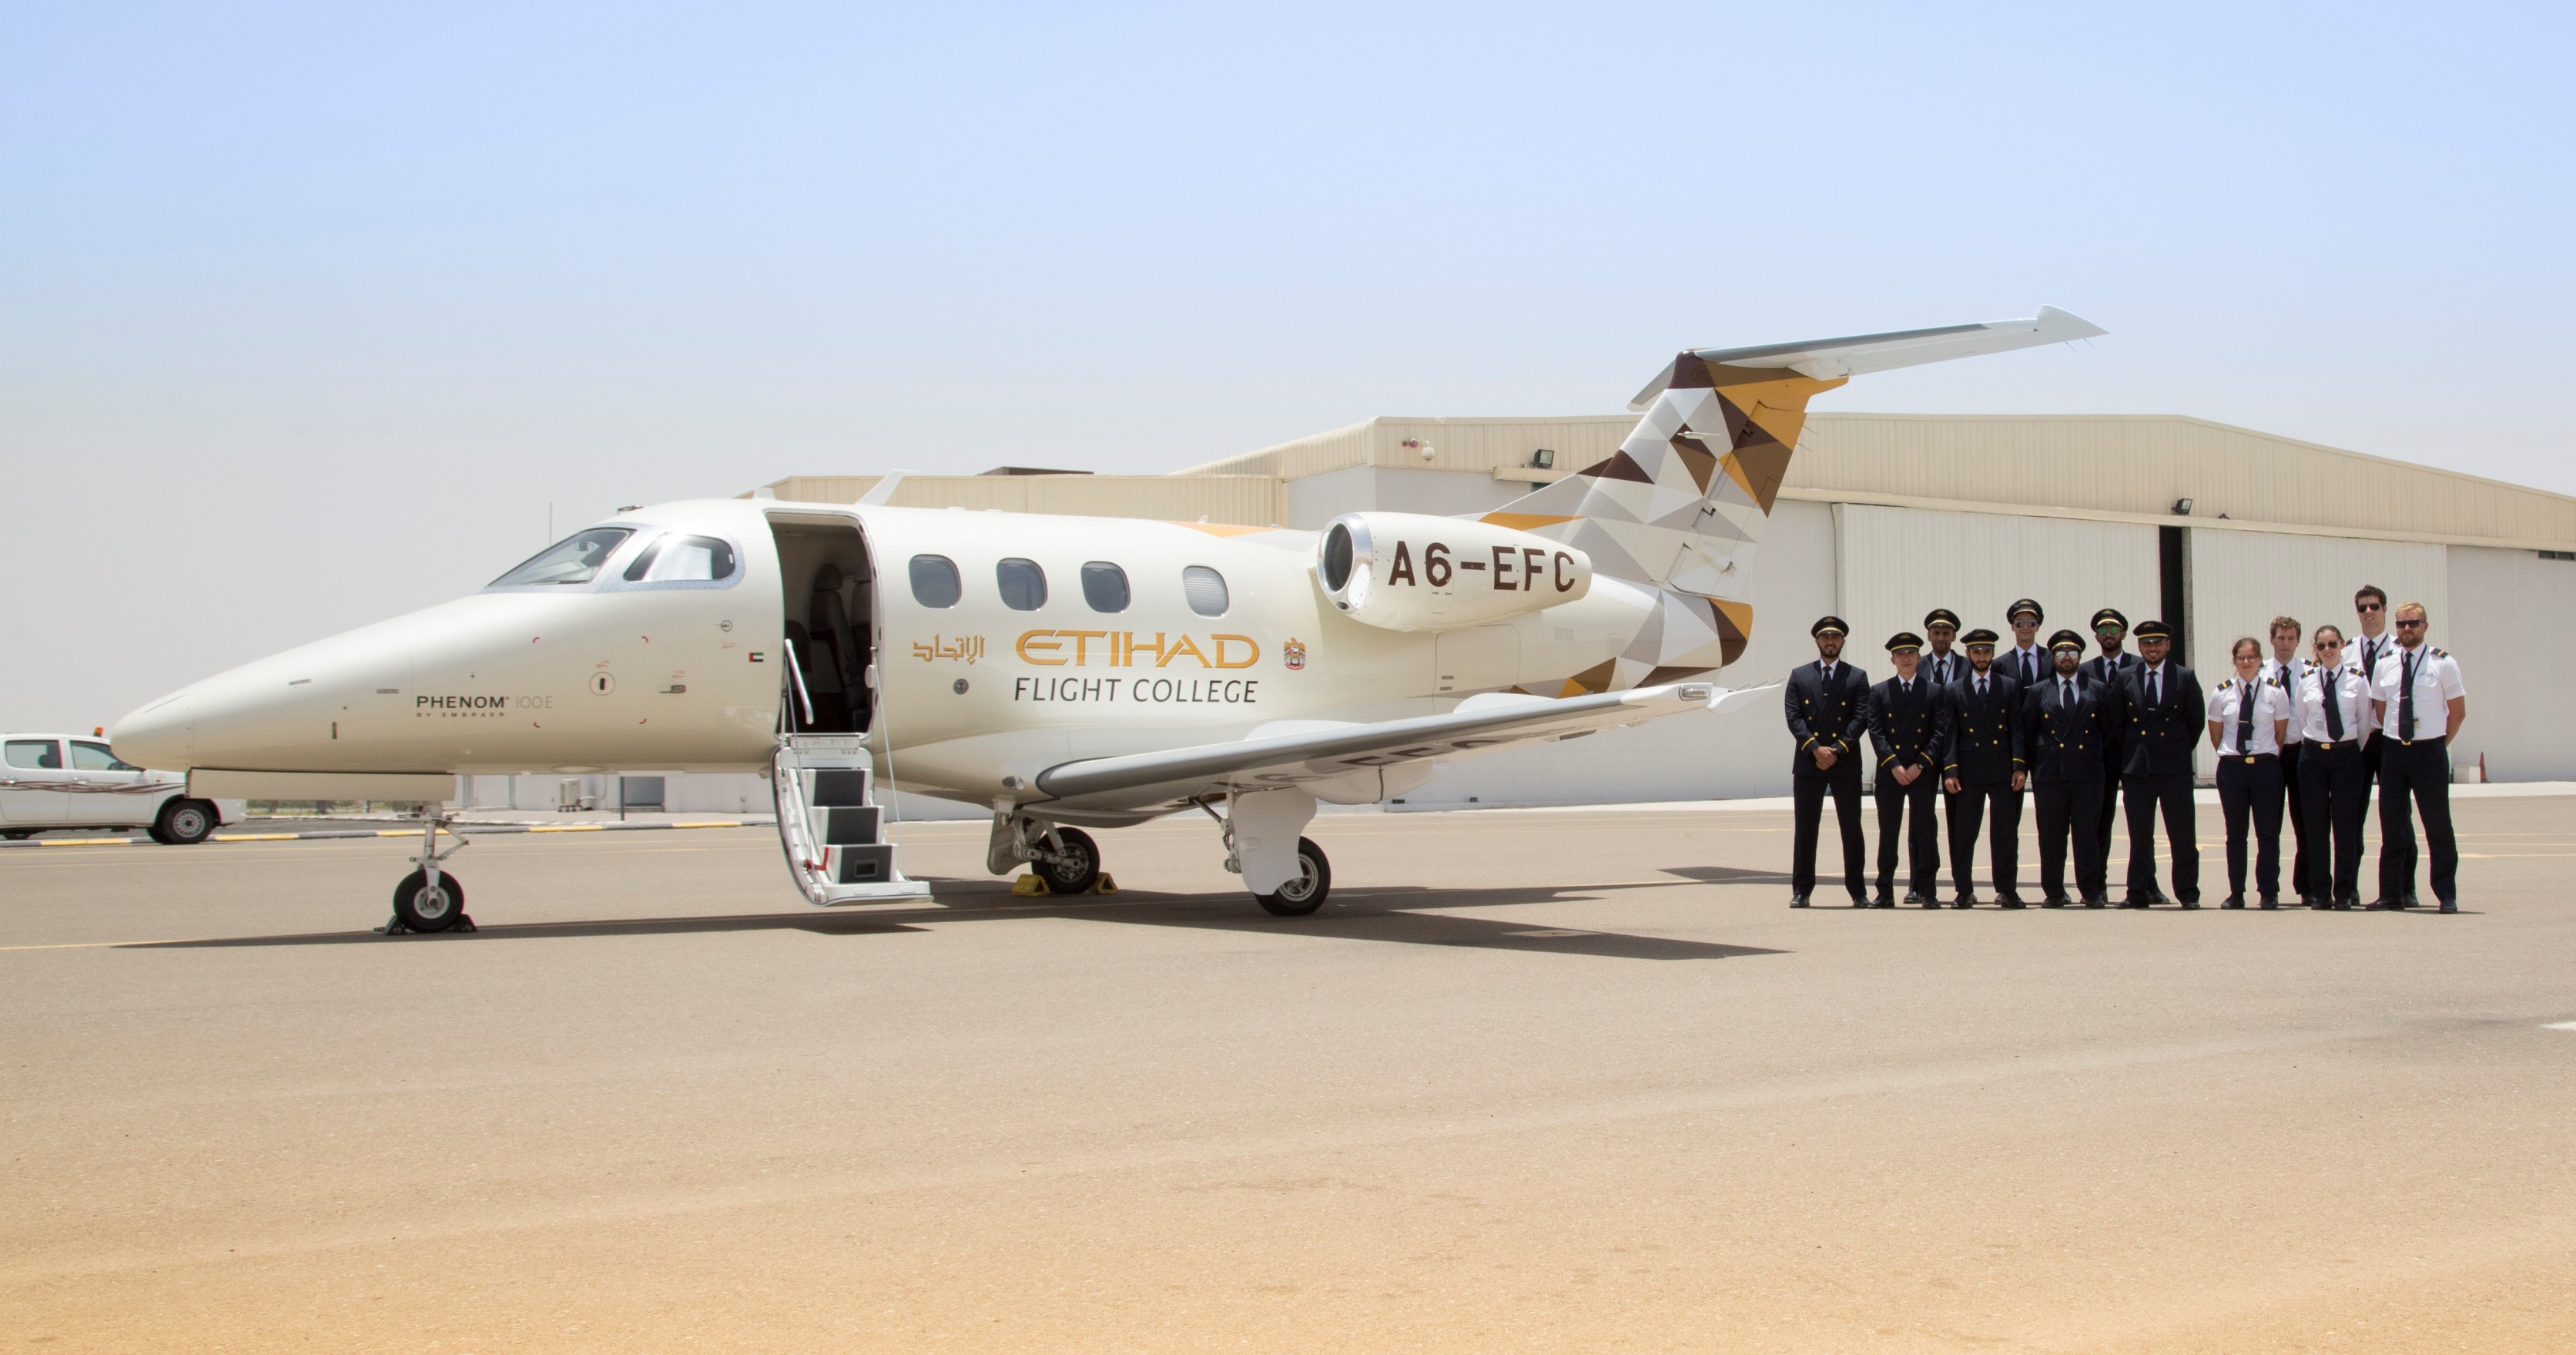 Etihad Flight College takes delivery of its first Phenom 100E from Embraer Executive Jets